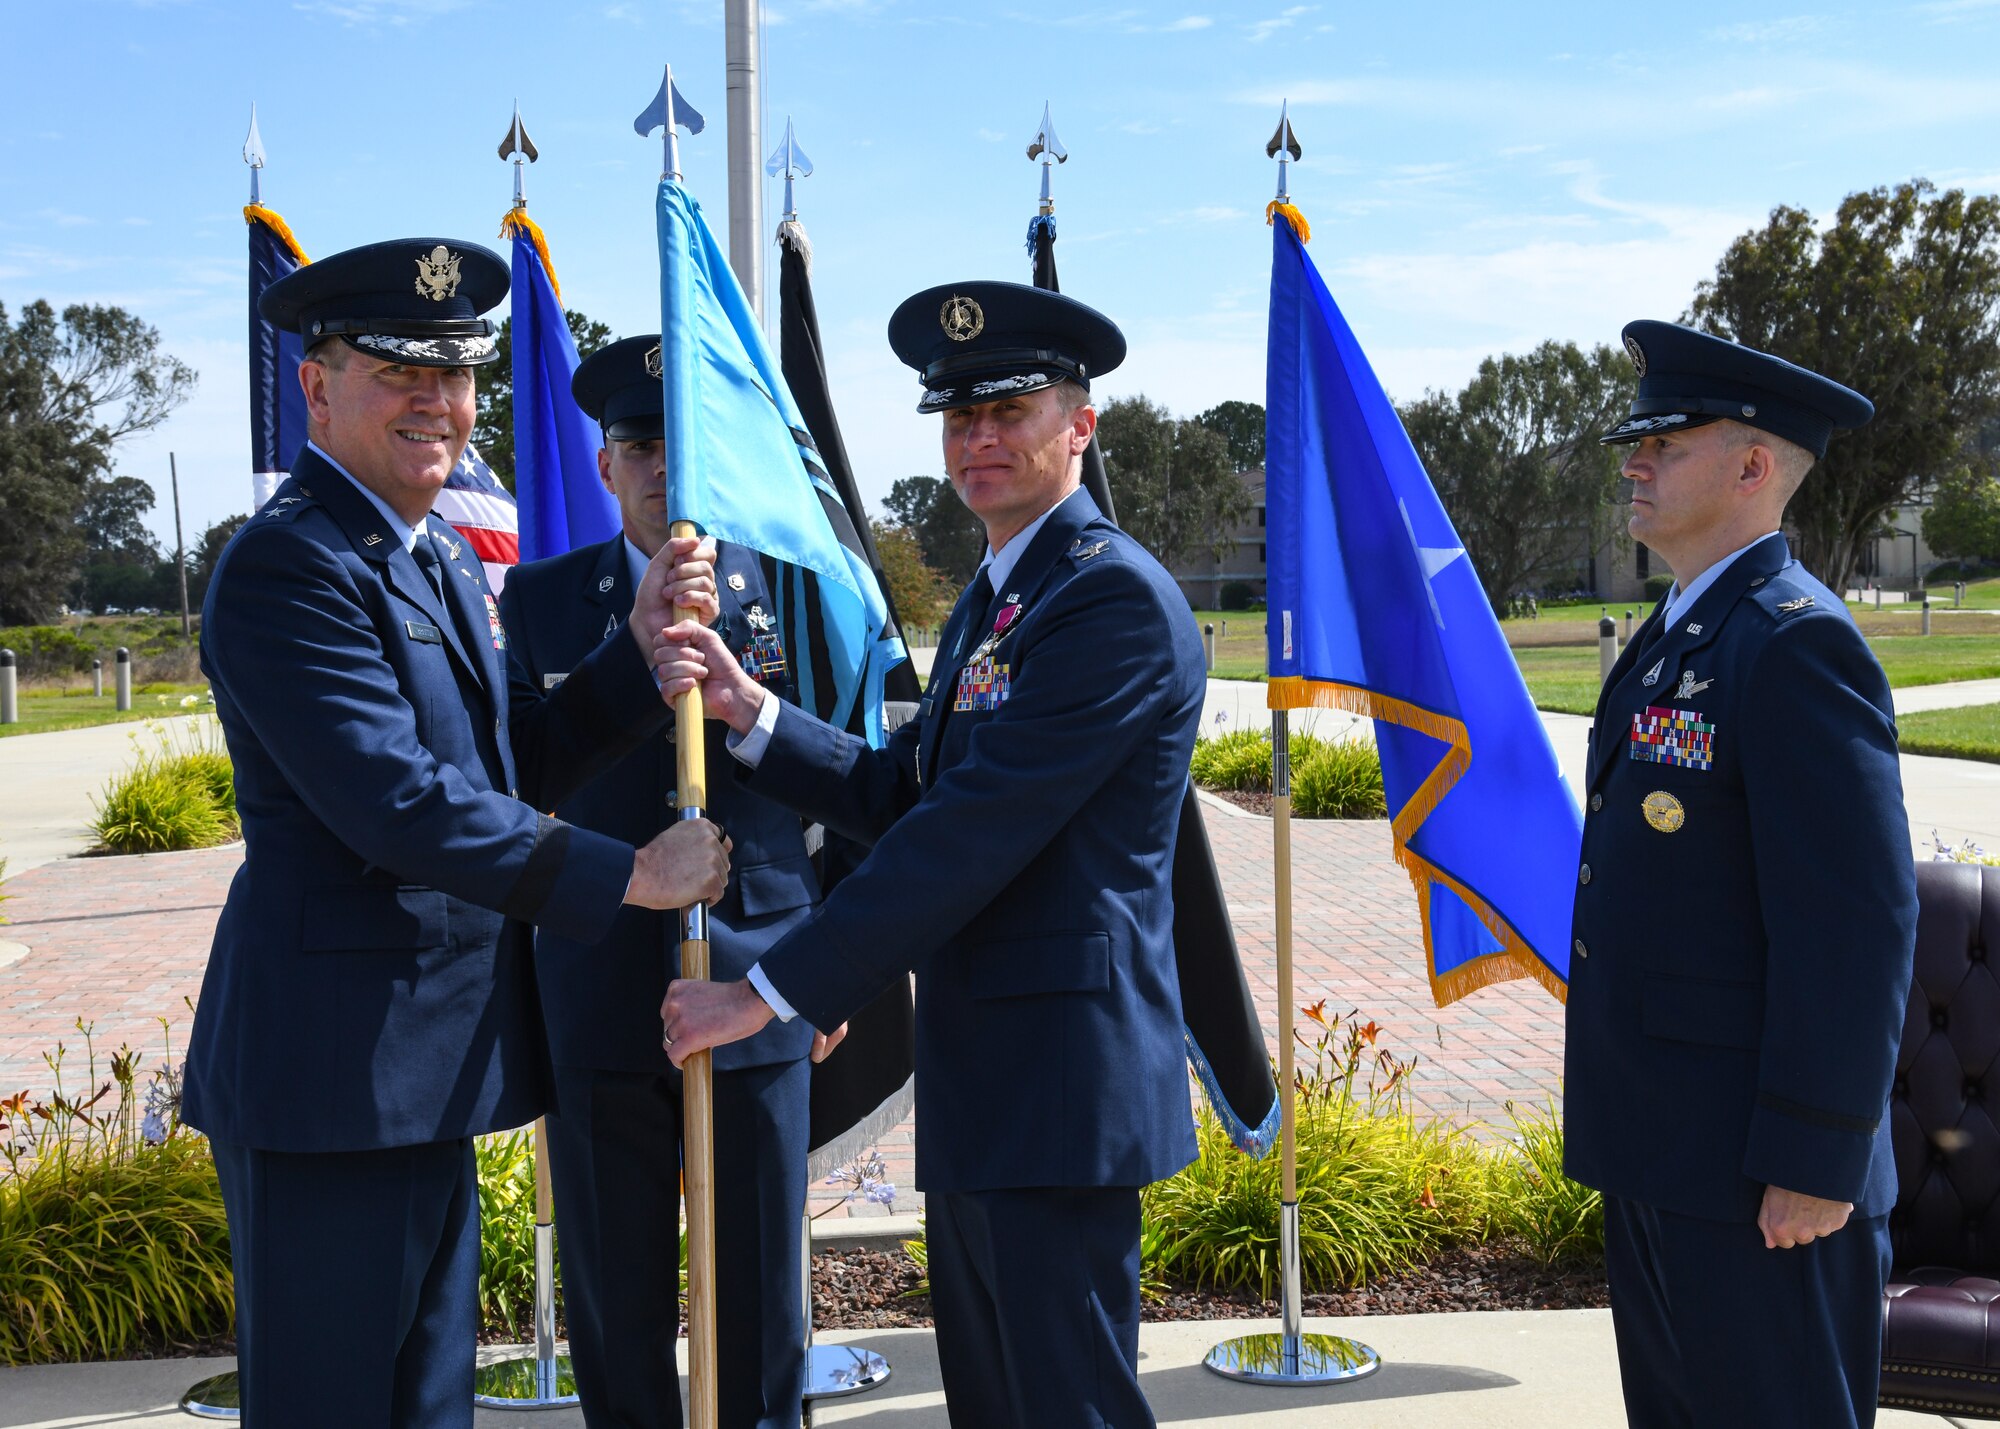 U.S. Air Force Maj. Gen. Shawn N. Bratton, Space Training and Readiness Command commander, receives the Delta 1 guidon from U.S. Space Force Col. Jason N. Schramm, outgoing Delta 1 commander, during the Delta 1 change of command ceremony at Vandenberg Space Force Base, Calif., July 17, 2023. U.S. Space Force Col. Peter Norsky, took command of Delta 1. (U.S. Space Force photo by Senior Airman Rocio Romo)